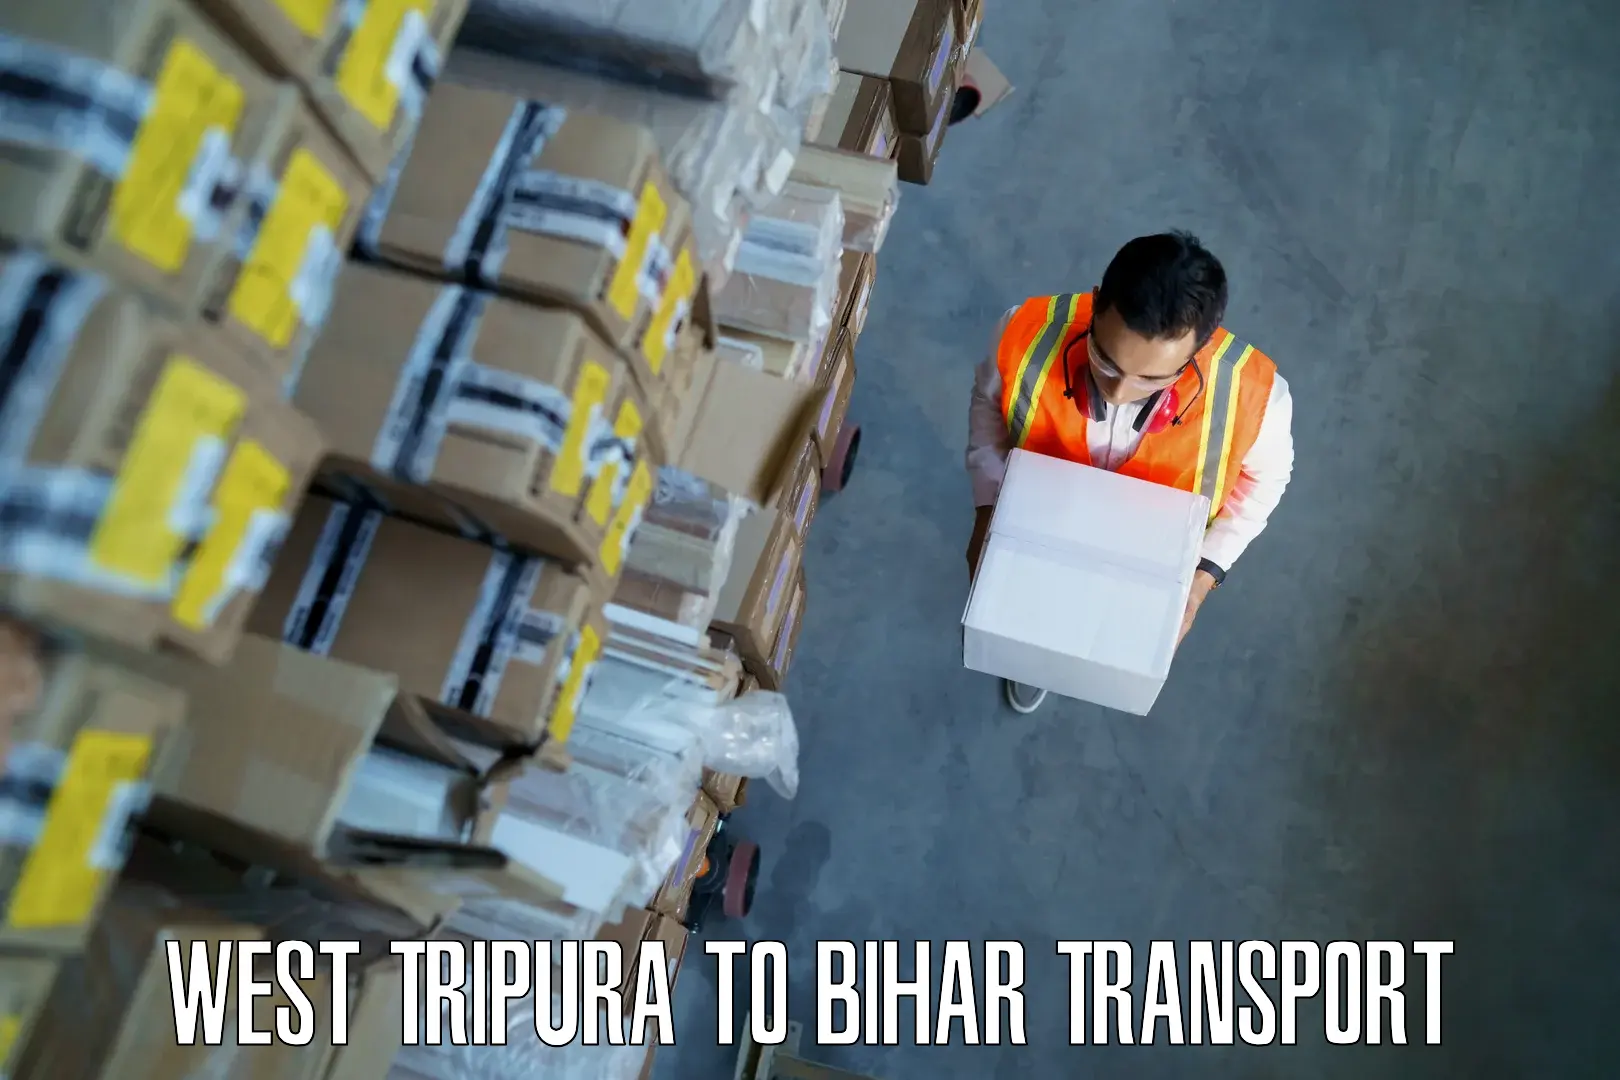 Delivery service West Tripura to Sangrampur